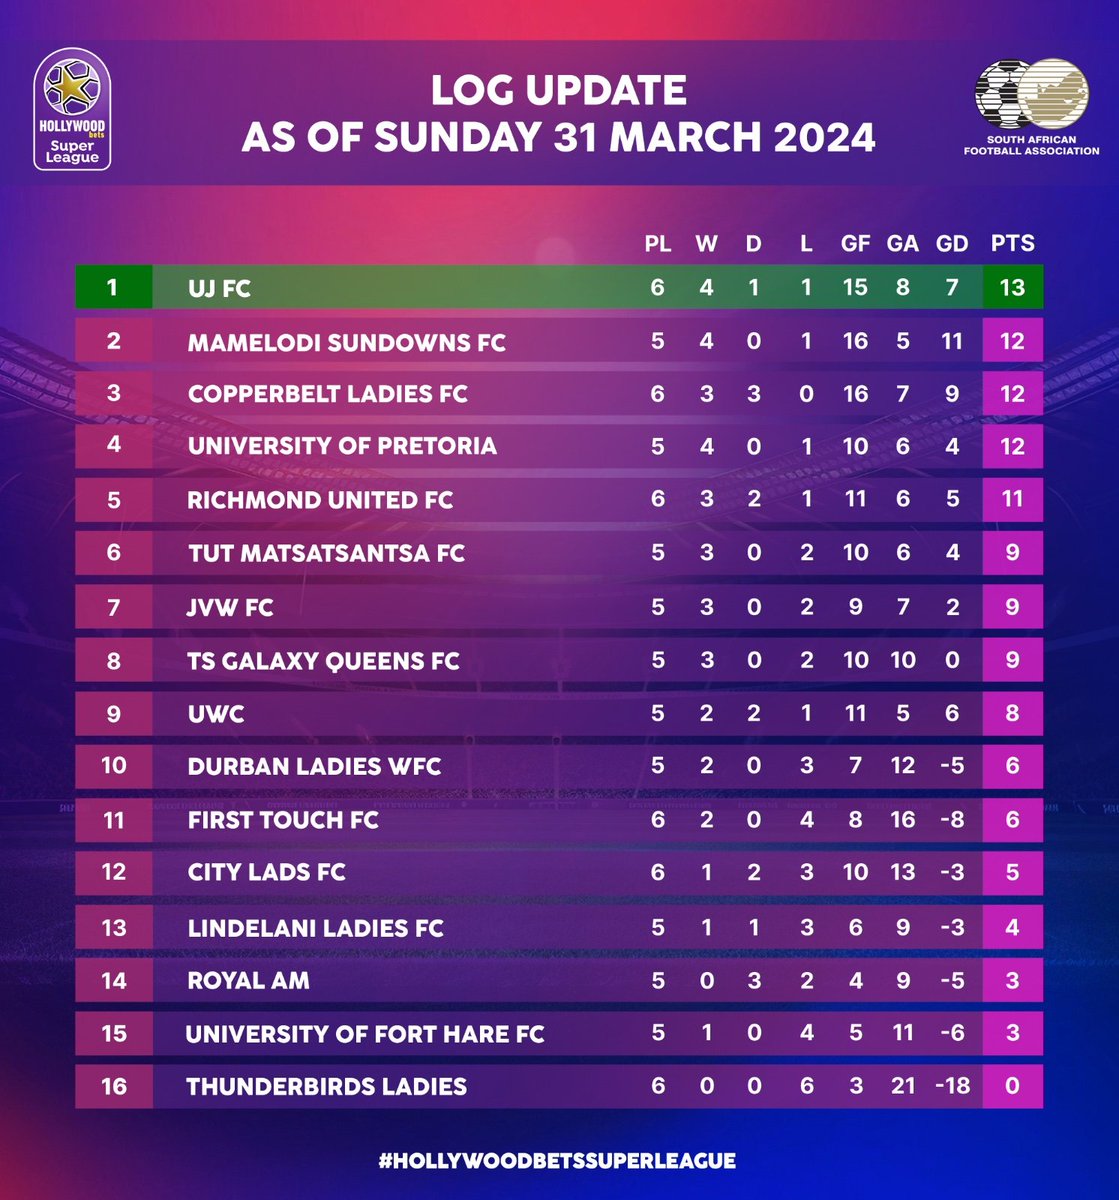 Hollywoodbets Super League (@HollywoodbetsSL) on Twitter photo 2024-03-31 20:41:11